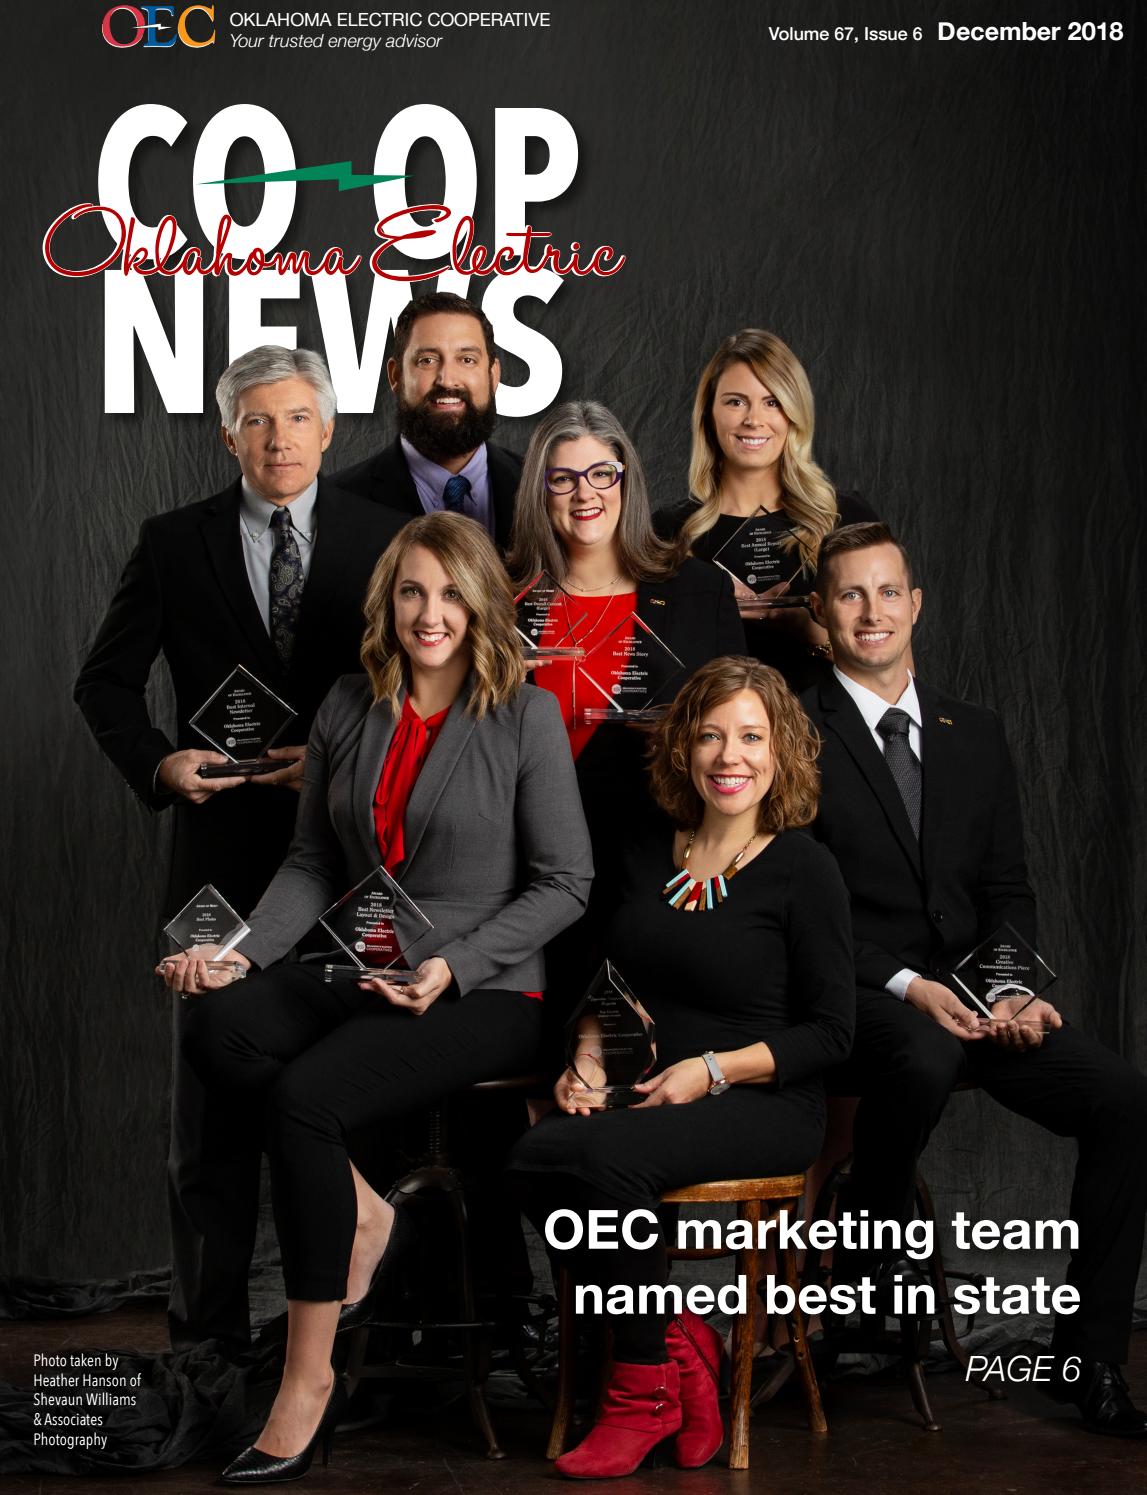 Oklahoma Electric Co-op News December - Magazine , HD Wallpaper & Backgrounds